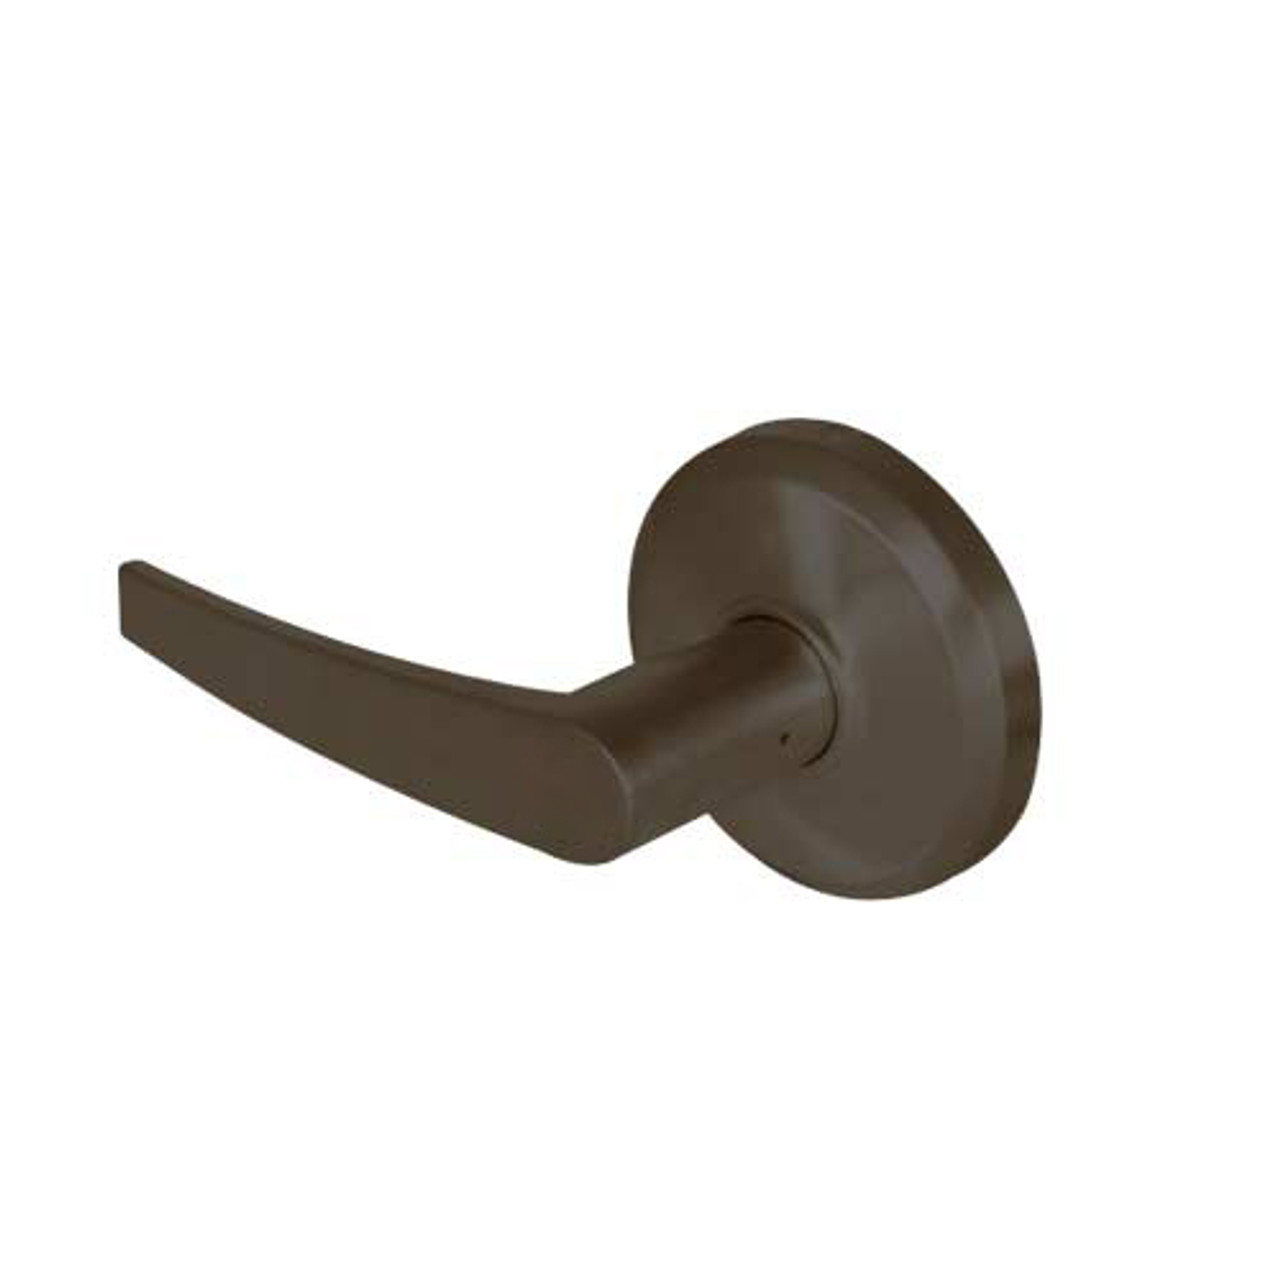 QCL235A613S3118F Stanley QCL200 Series Cylindrical Communicating Lock with Slate Lever in Oil Rubbed Bronze Finish